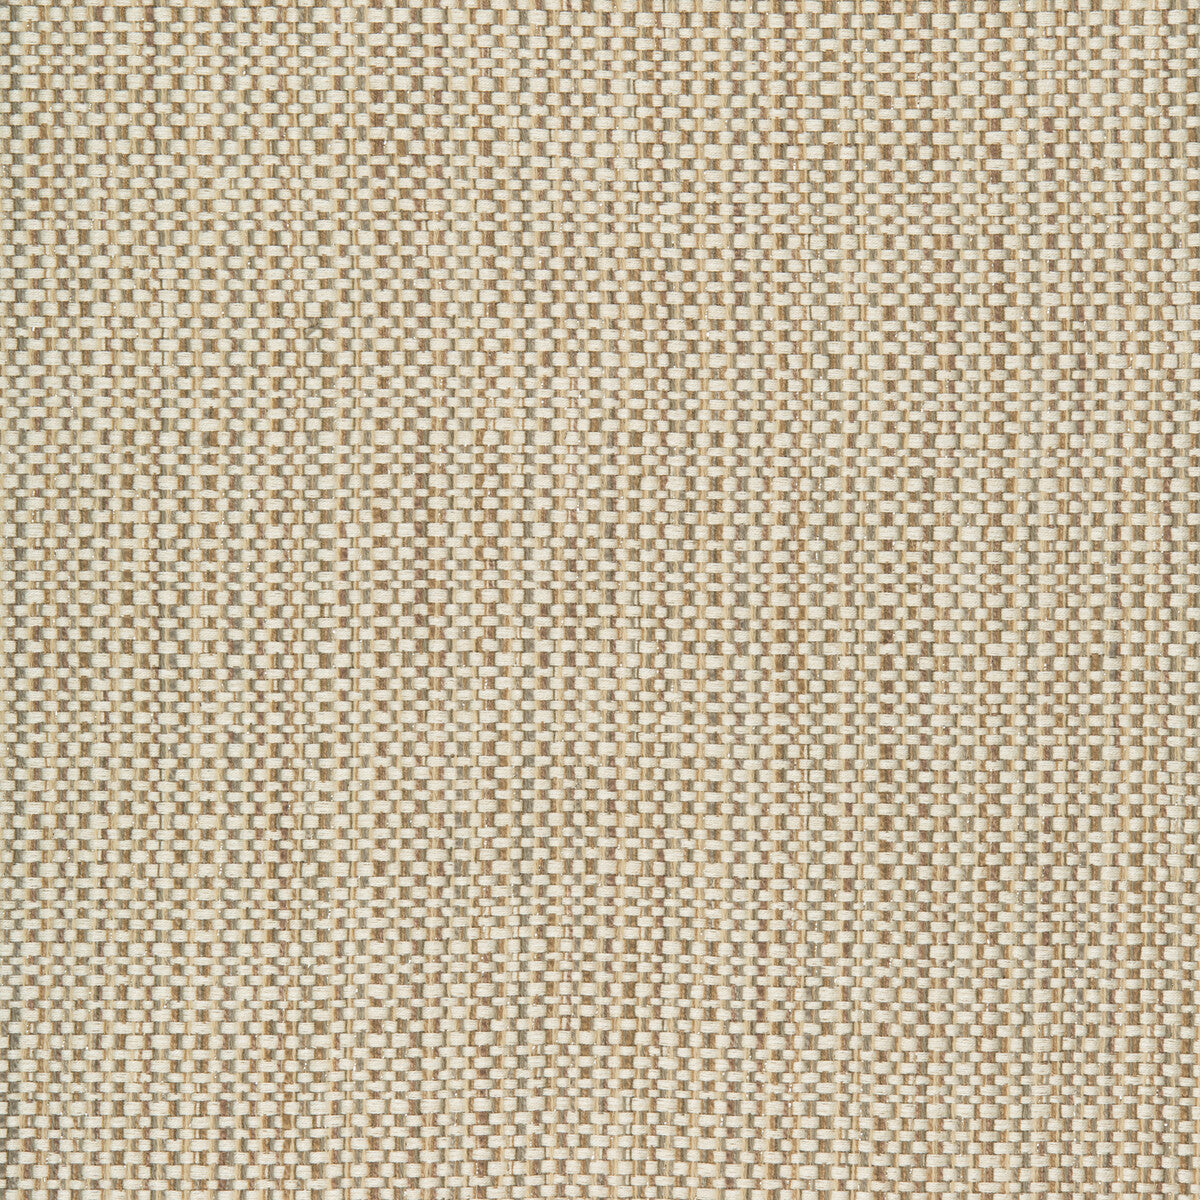 Kravet Design fabric in 34683-611 color - pattern 34683.611.0 - by Kravet Design in the Performance Crypton Home collection